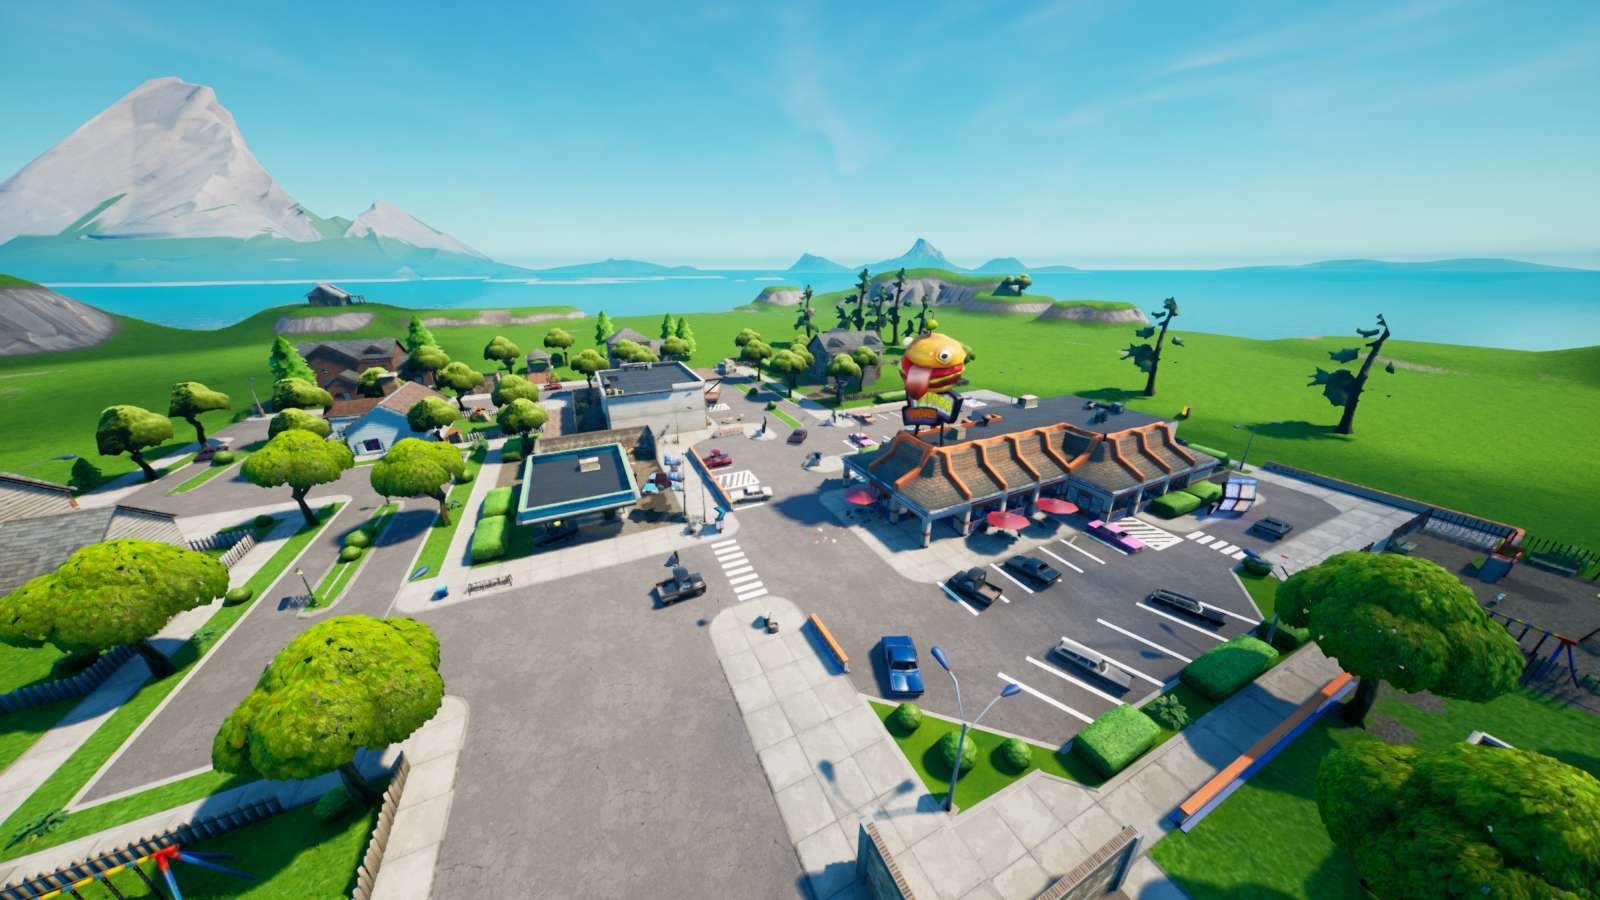 GREASY GROVE FREE-FOR-ALL